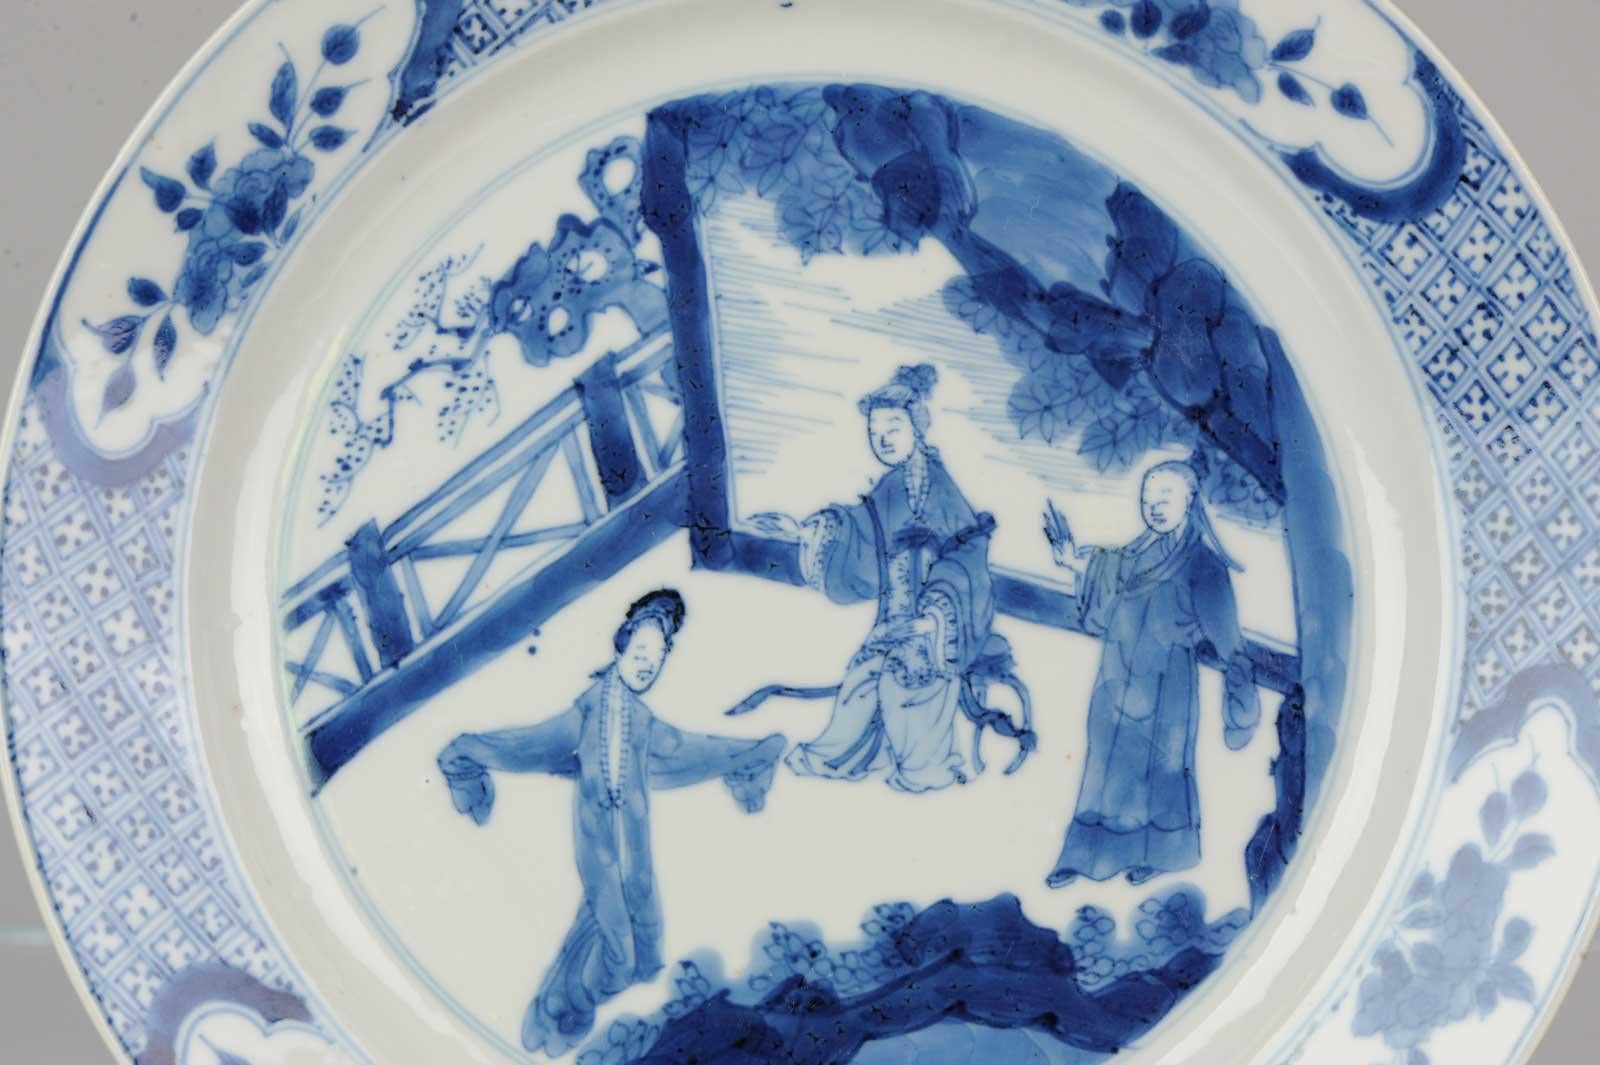 Nice blue and white porcelain plate, decorated with the well known pagode scene. Chenghua Marked at base but of Kangxi period.

Absolute top quality porcelain and painting.

Condition
Overall condition 1 line and some frits to rim and base rim.